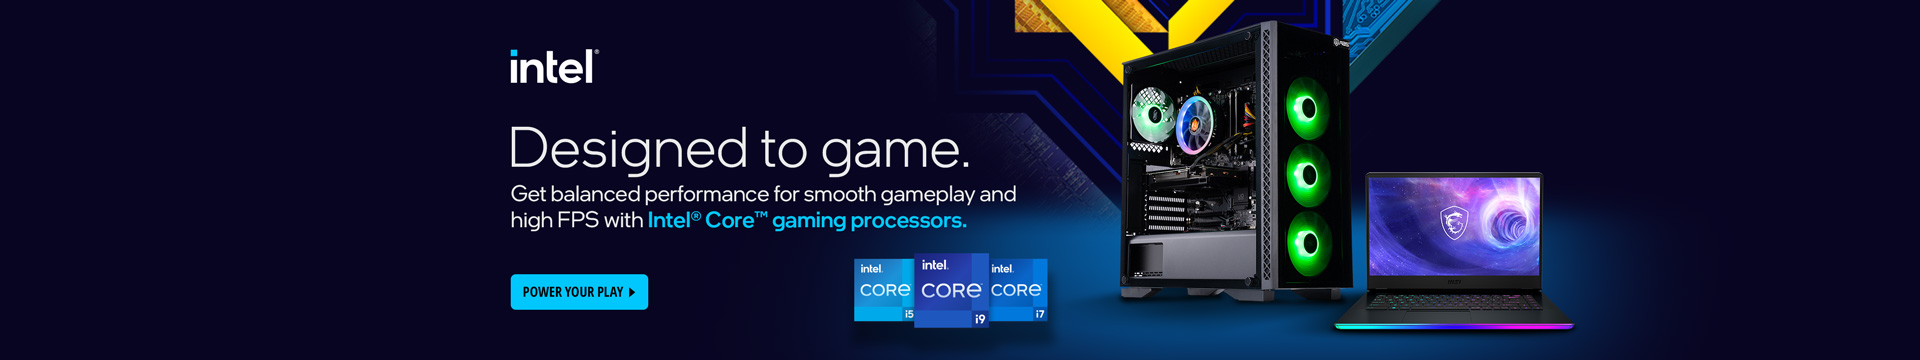 Intel Designed to Game